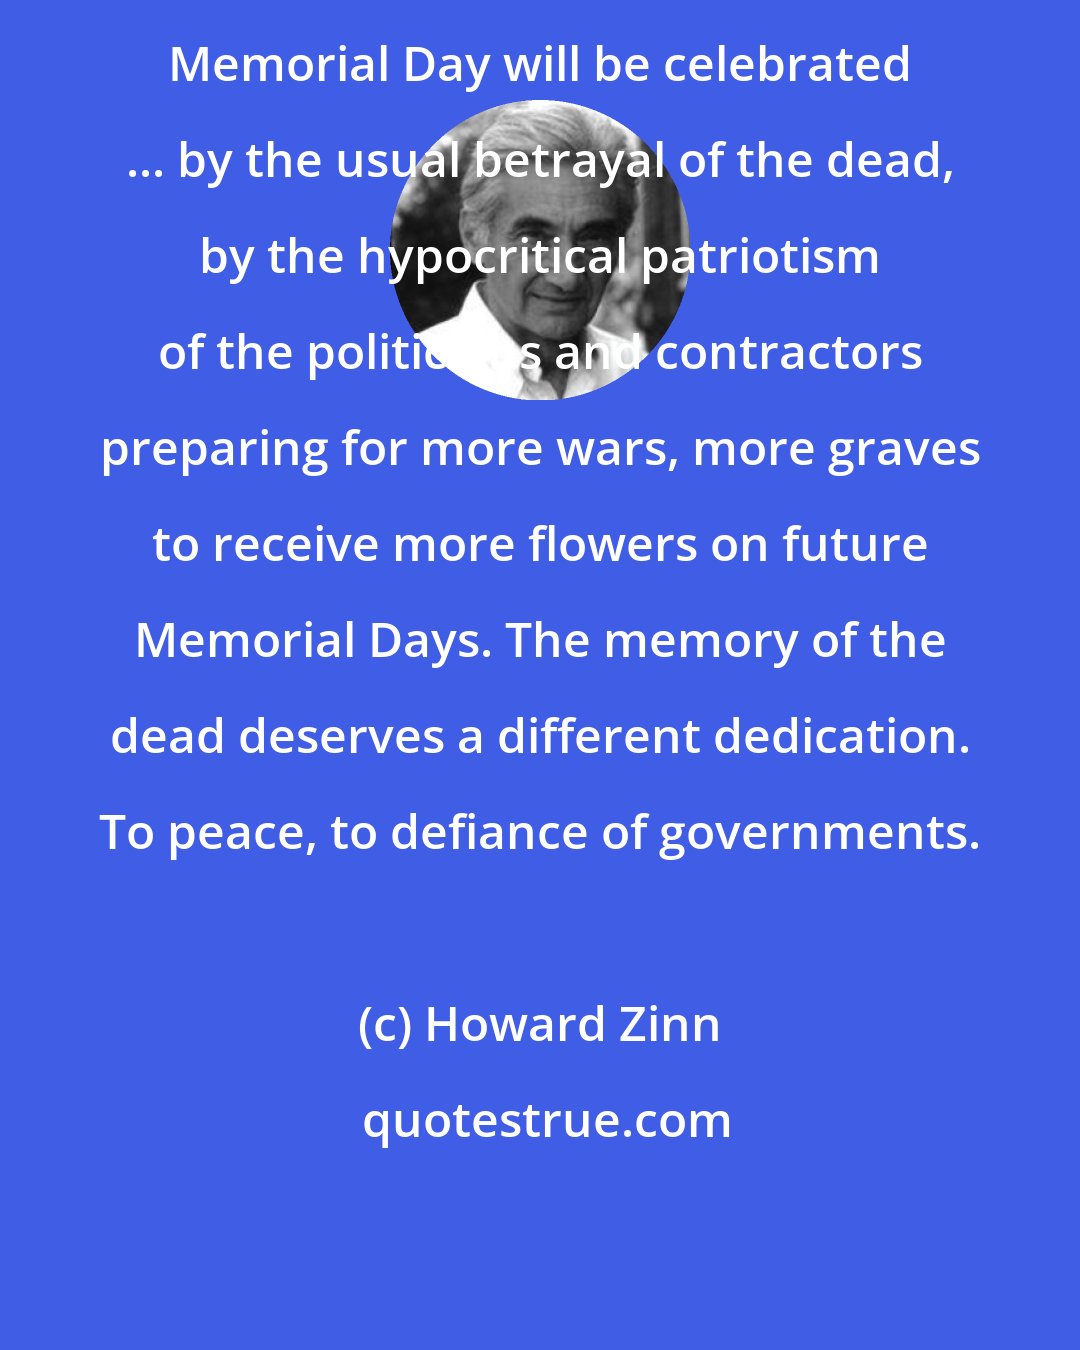 Howard Zinn: Memorial Day will be celebrated ... by the usual betrayal of the dead, by the hypocritical patriotism of the politicians and contractors preparing for more wars, more graves to receive more flowers on future Memorial Days. The memory of the dead deserves a different dedication. To peace, to defiance of governments.